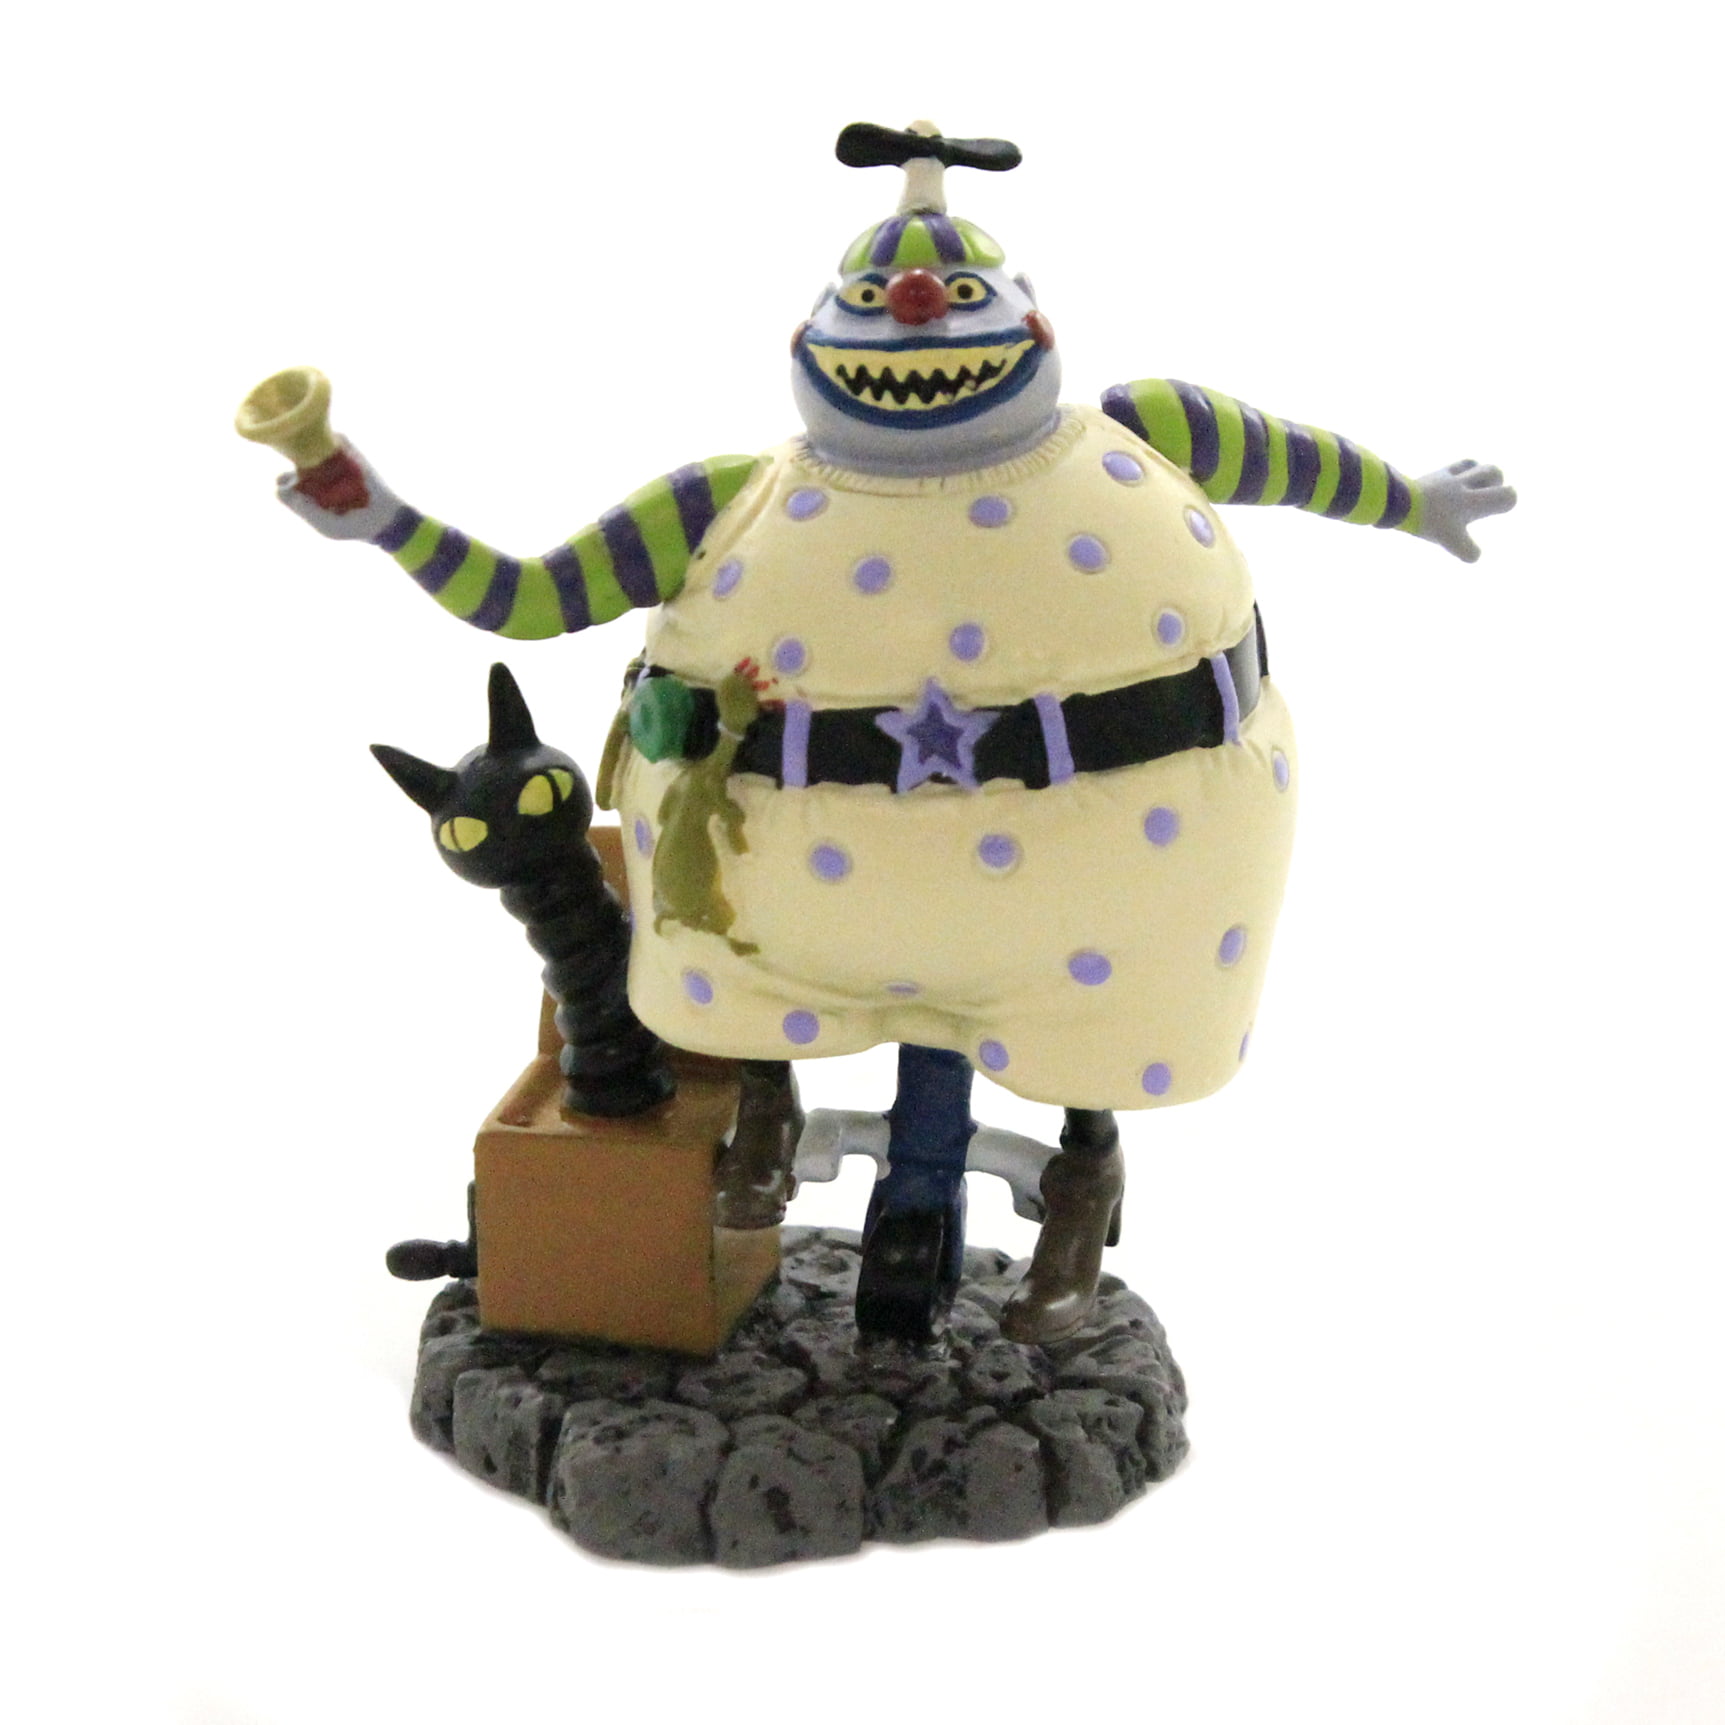 Dept 56 Accessory CLOWN WITH THE TEAR AWAY FACE Nightmare Christmas